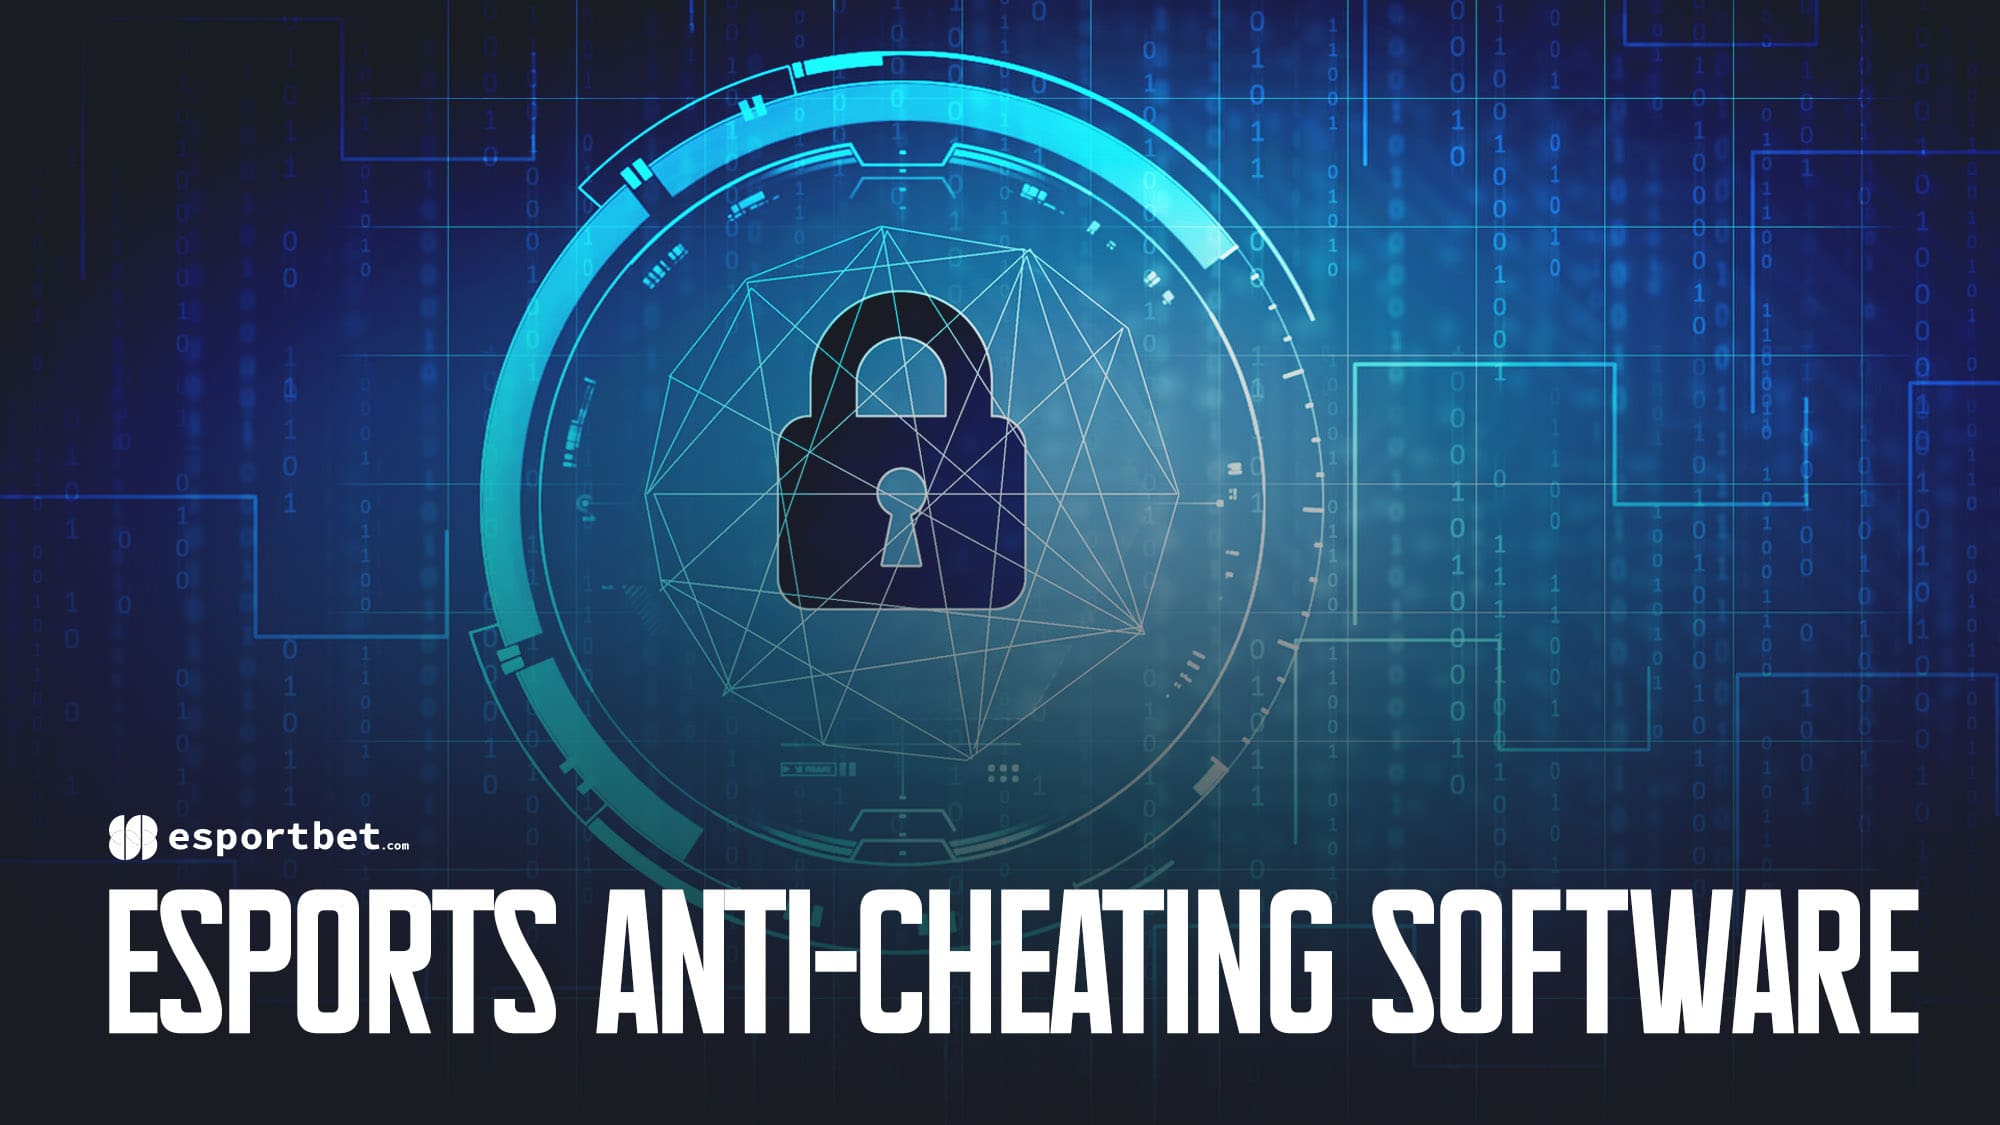 What's the Deal With Anti-Cheat Software in Online Games?